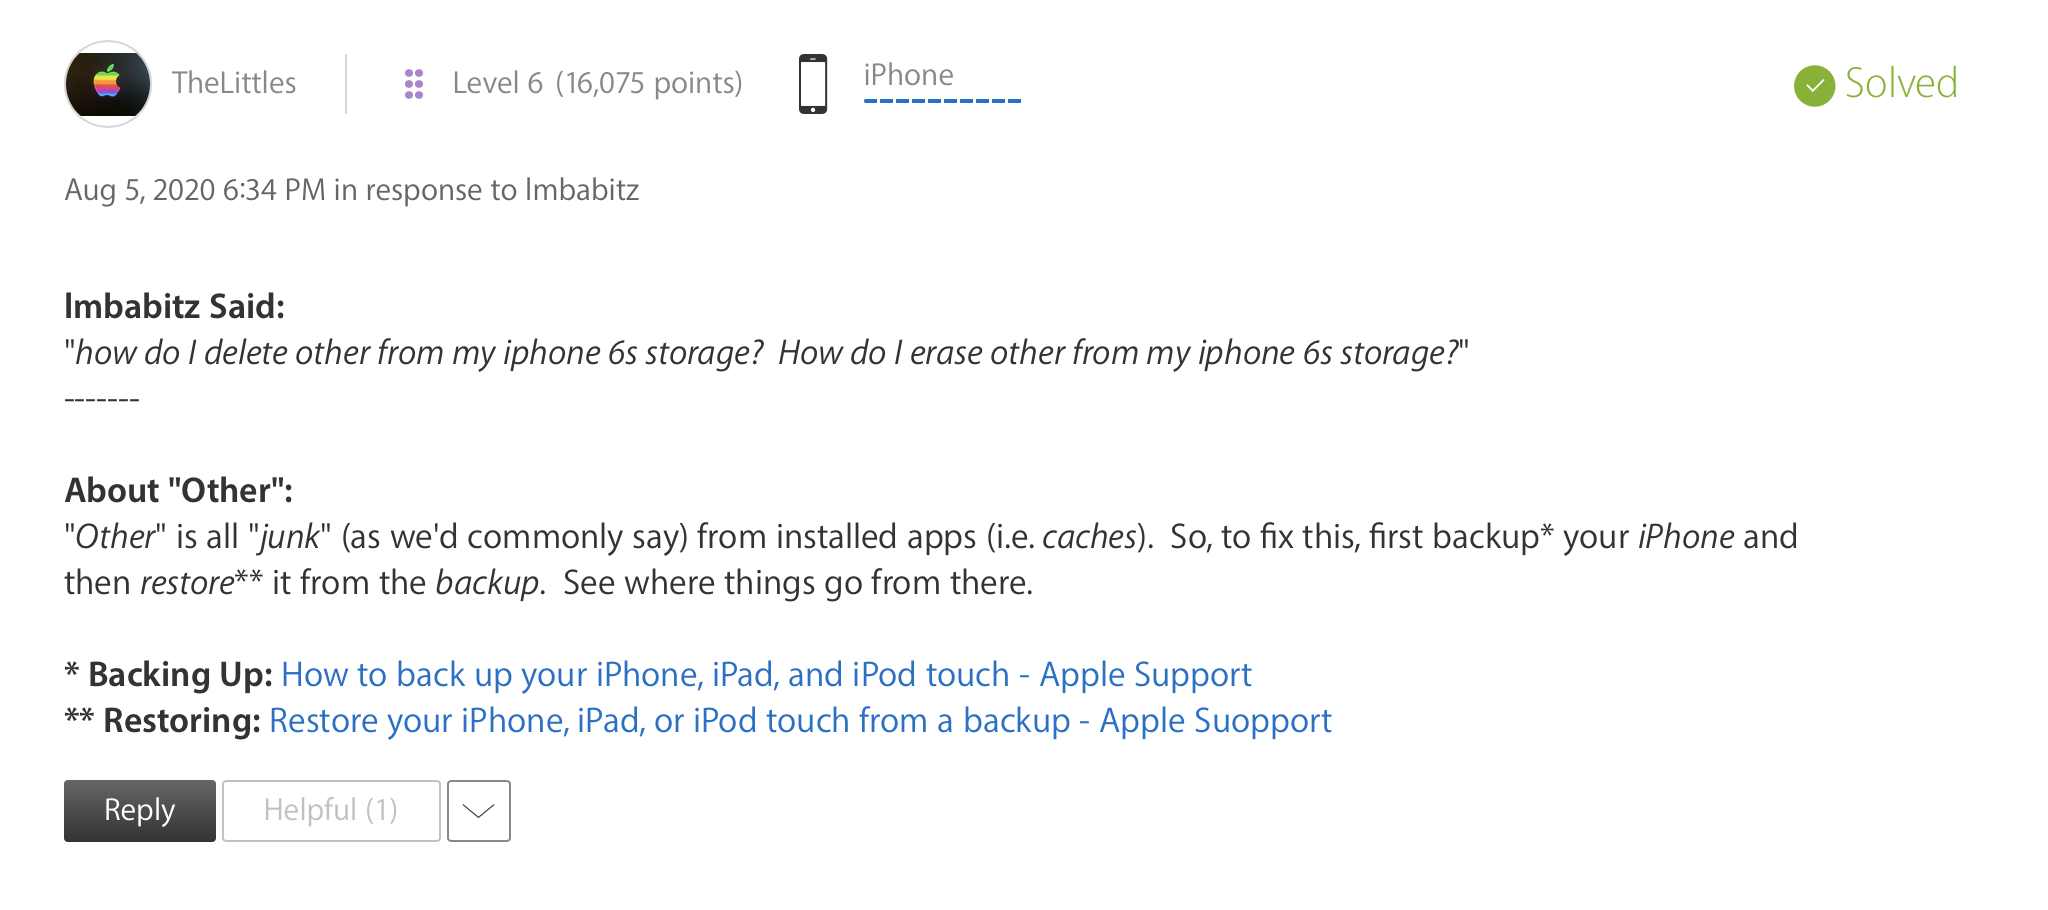 Restore your iPhone, iPad, or iPod touch from a backup - Apple Support